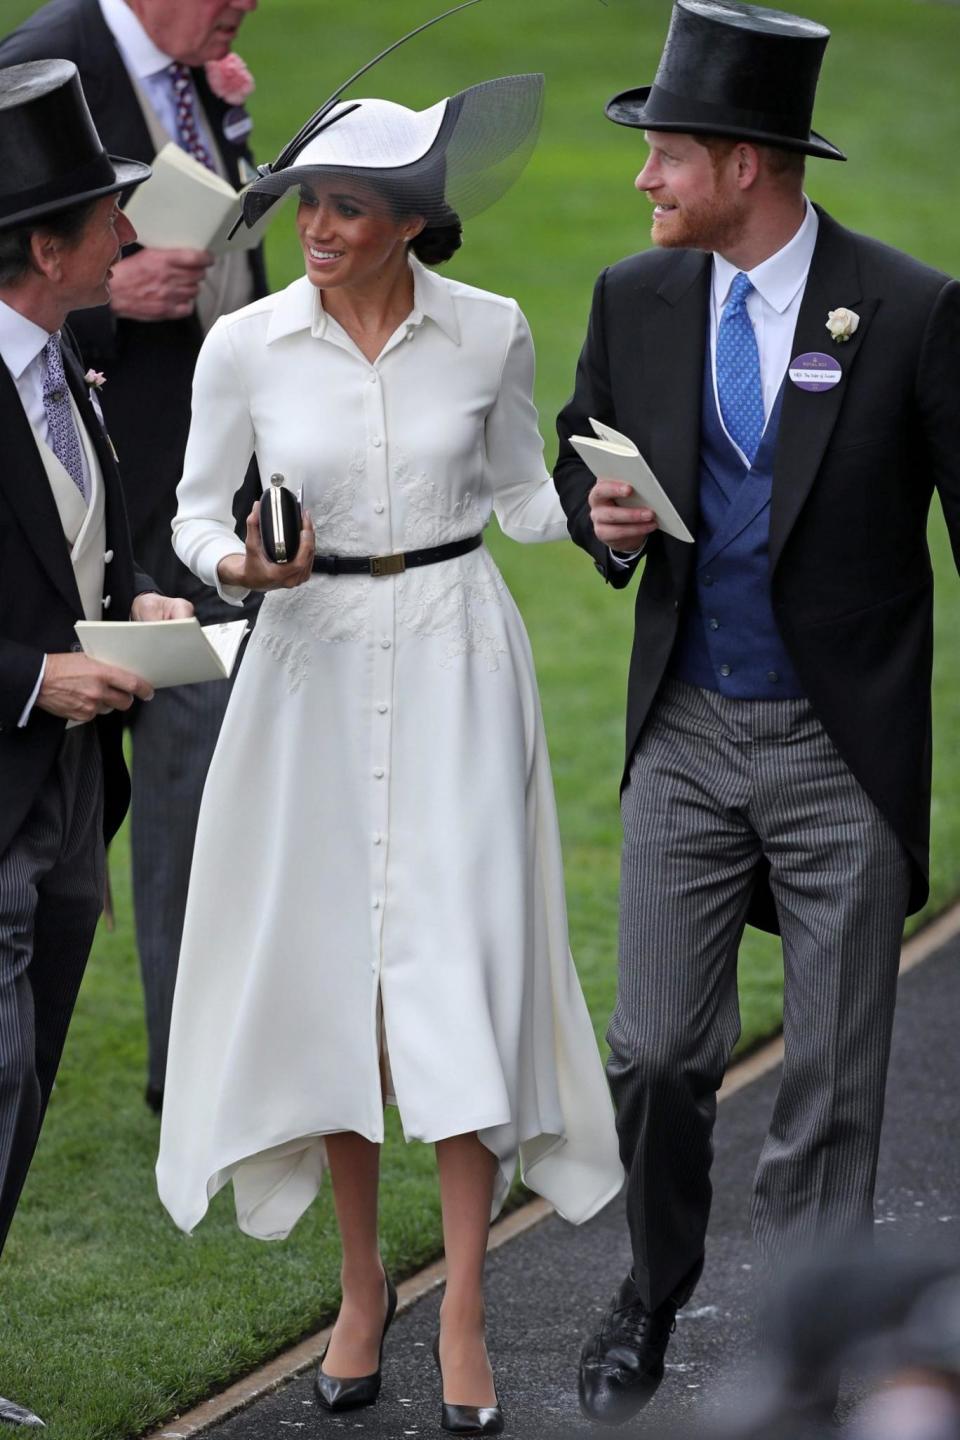 The Duchess wore a mid-length white dress with a black belt and shoes (AFP/Getty Images)